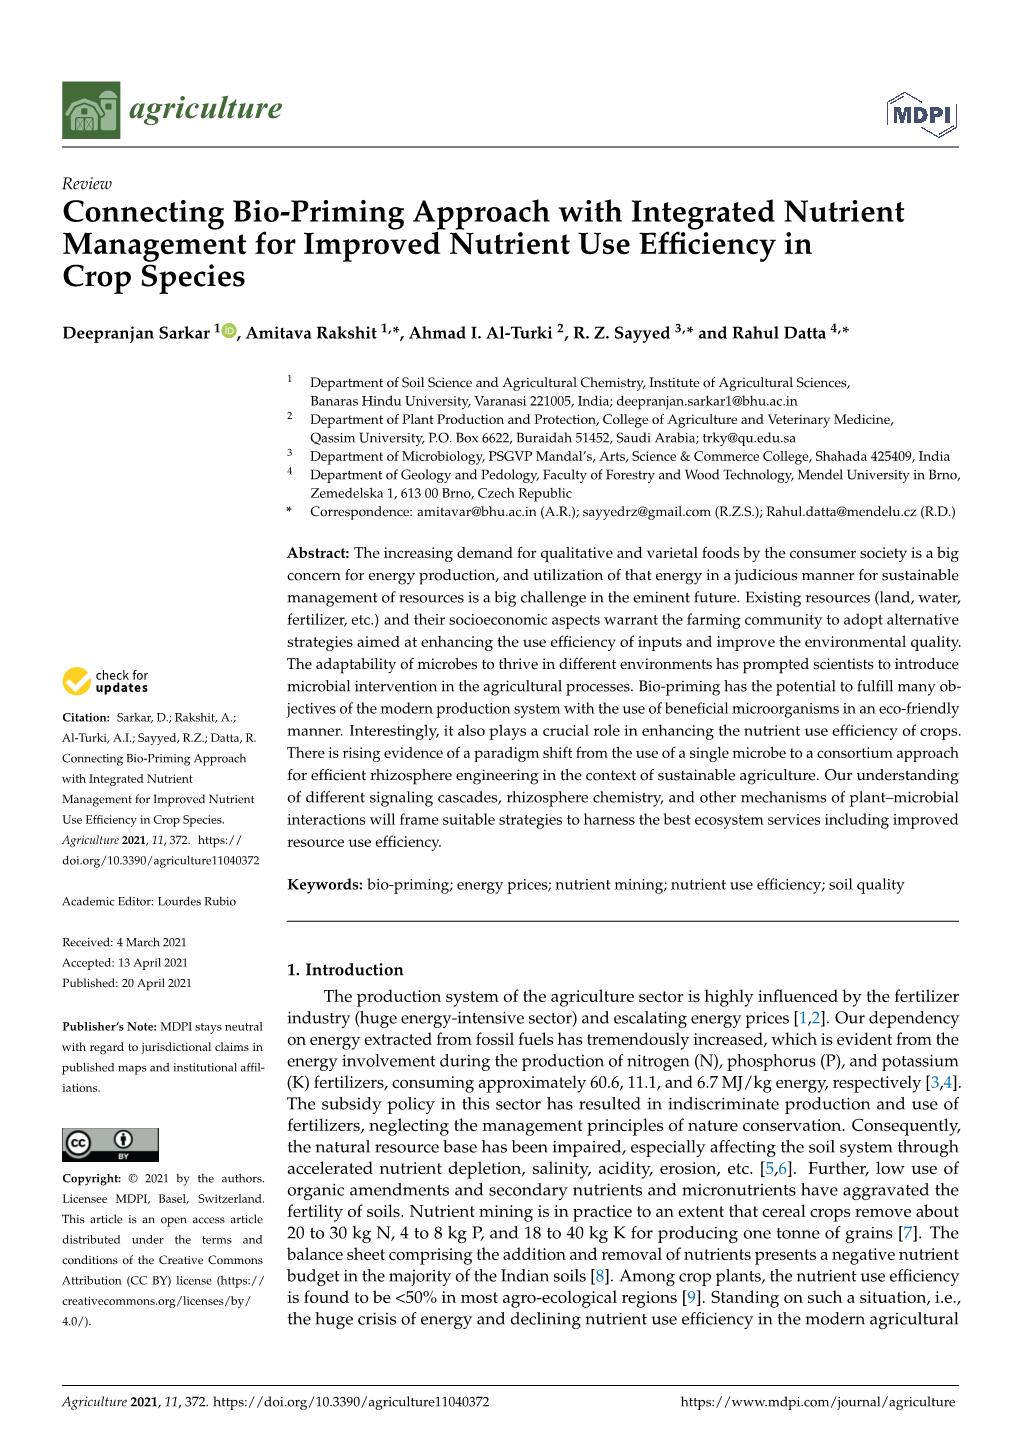 Connecting Bio-Priming Approach with Integrated Nutrient Management for Improved Nutrient Use Efﬁciency in Crop Species